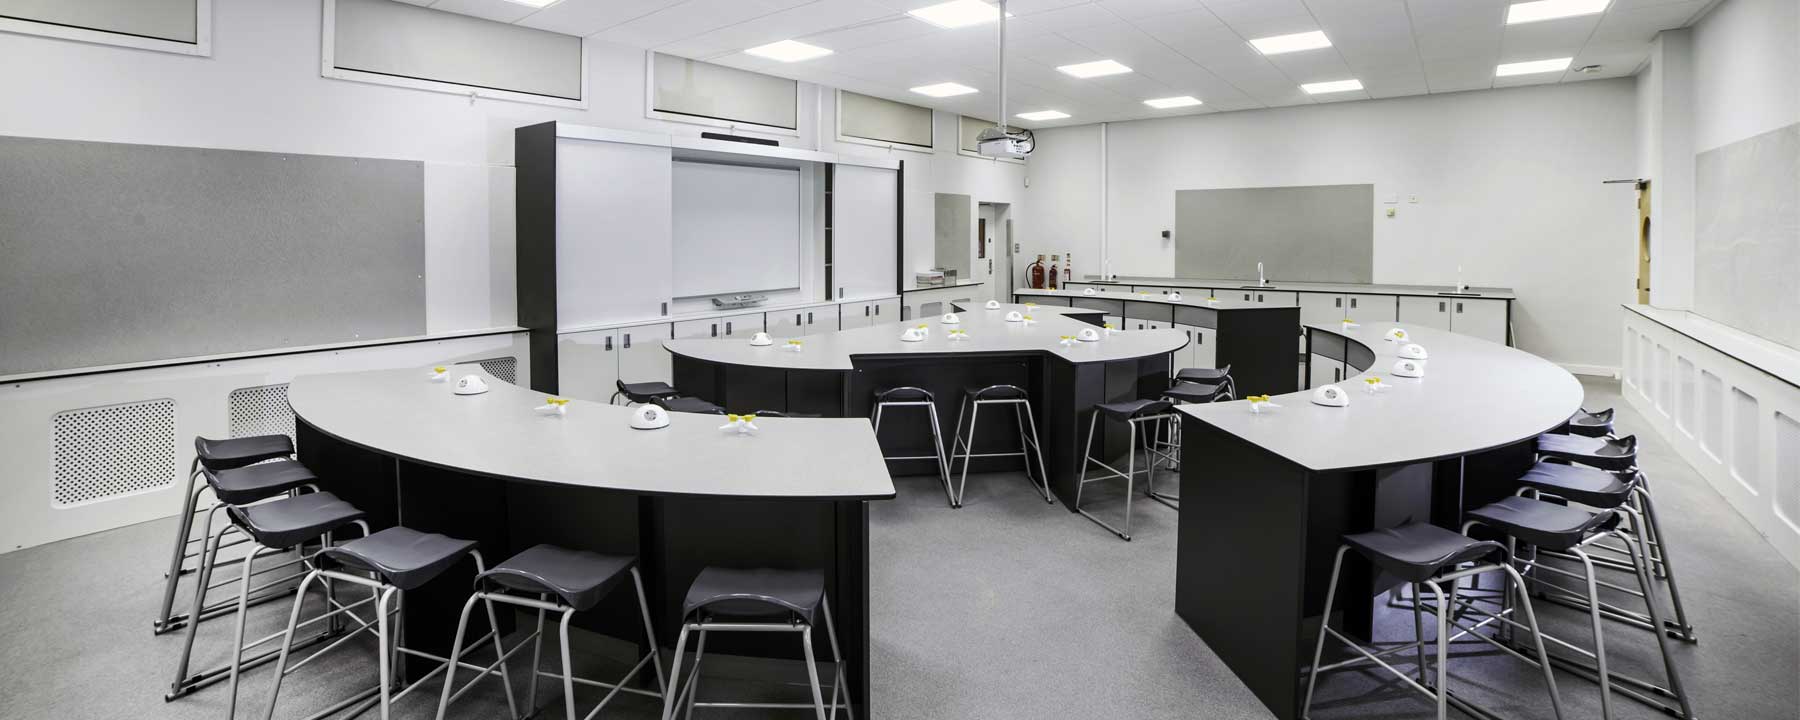 The Science of Classroom Design